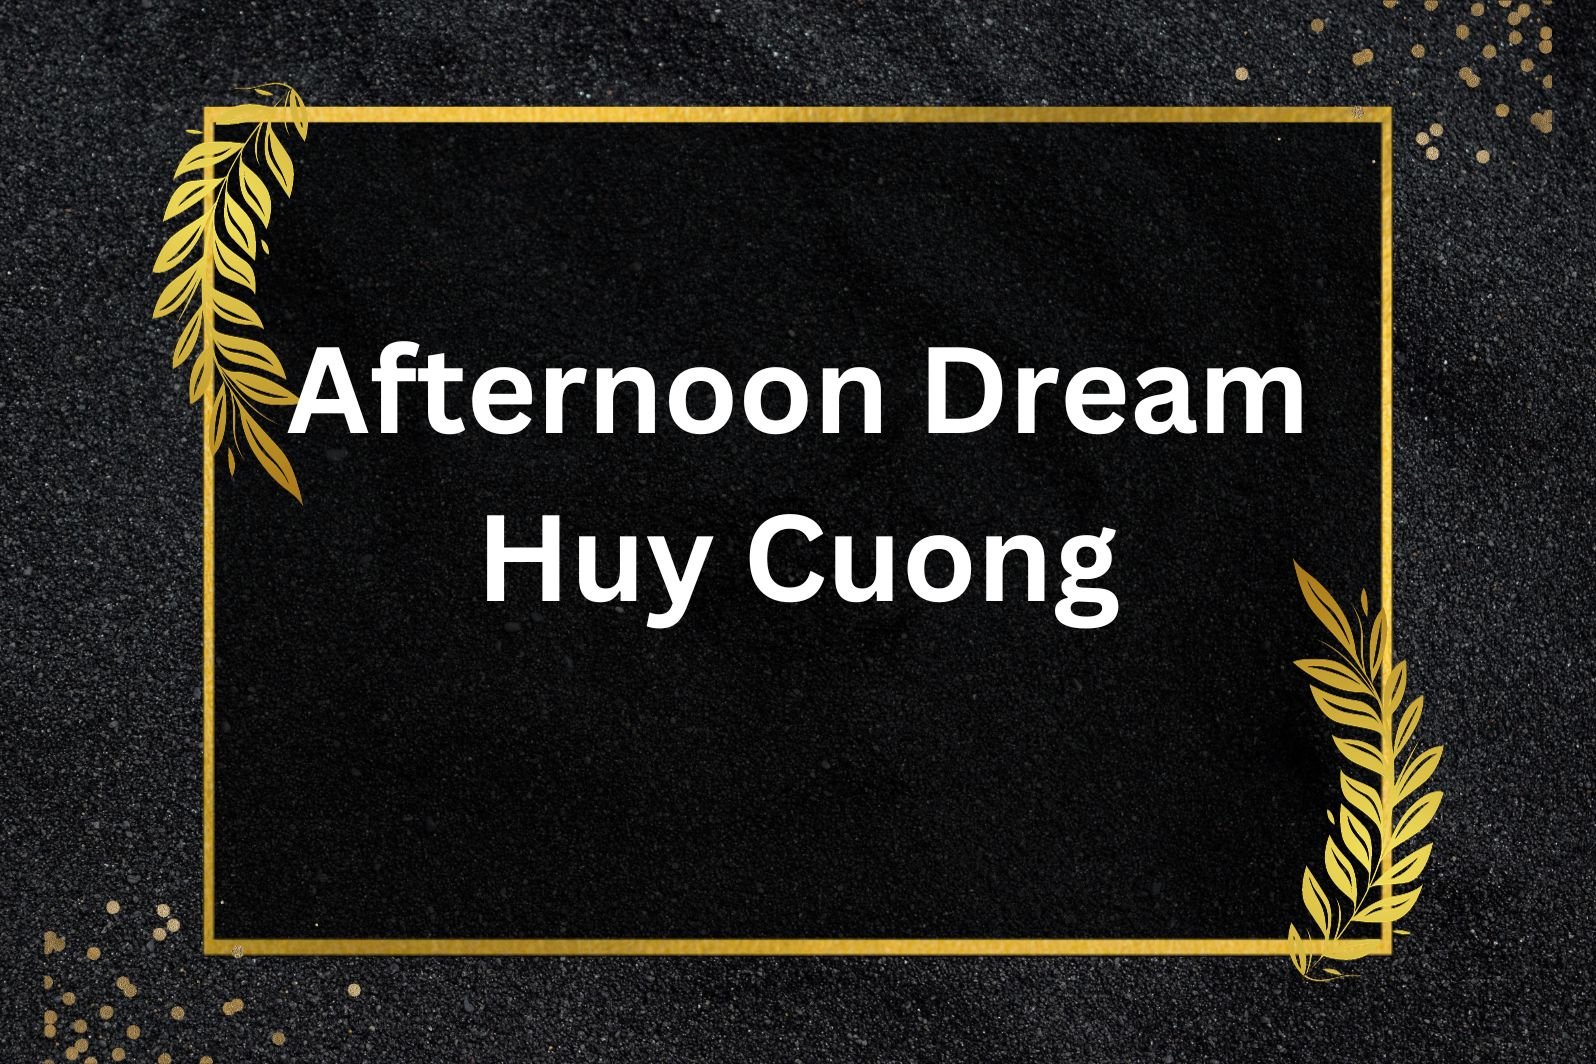 bright day of me huy cuong • afternoon dream • 2021